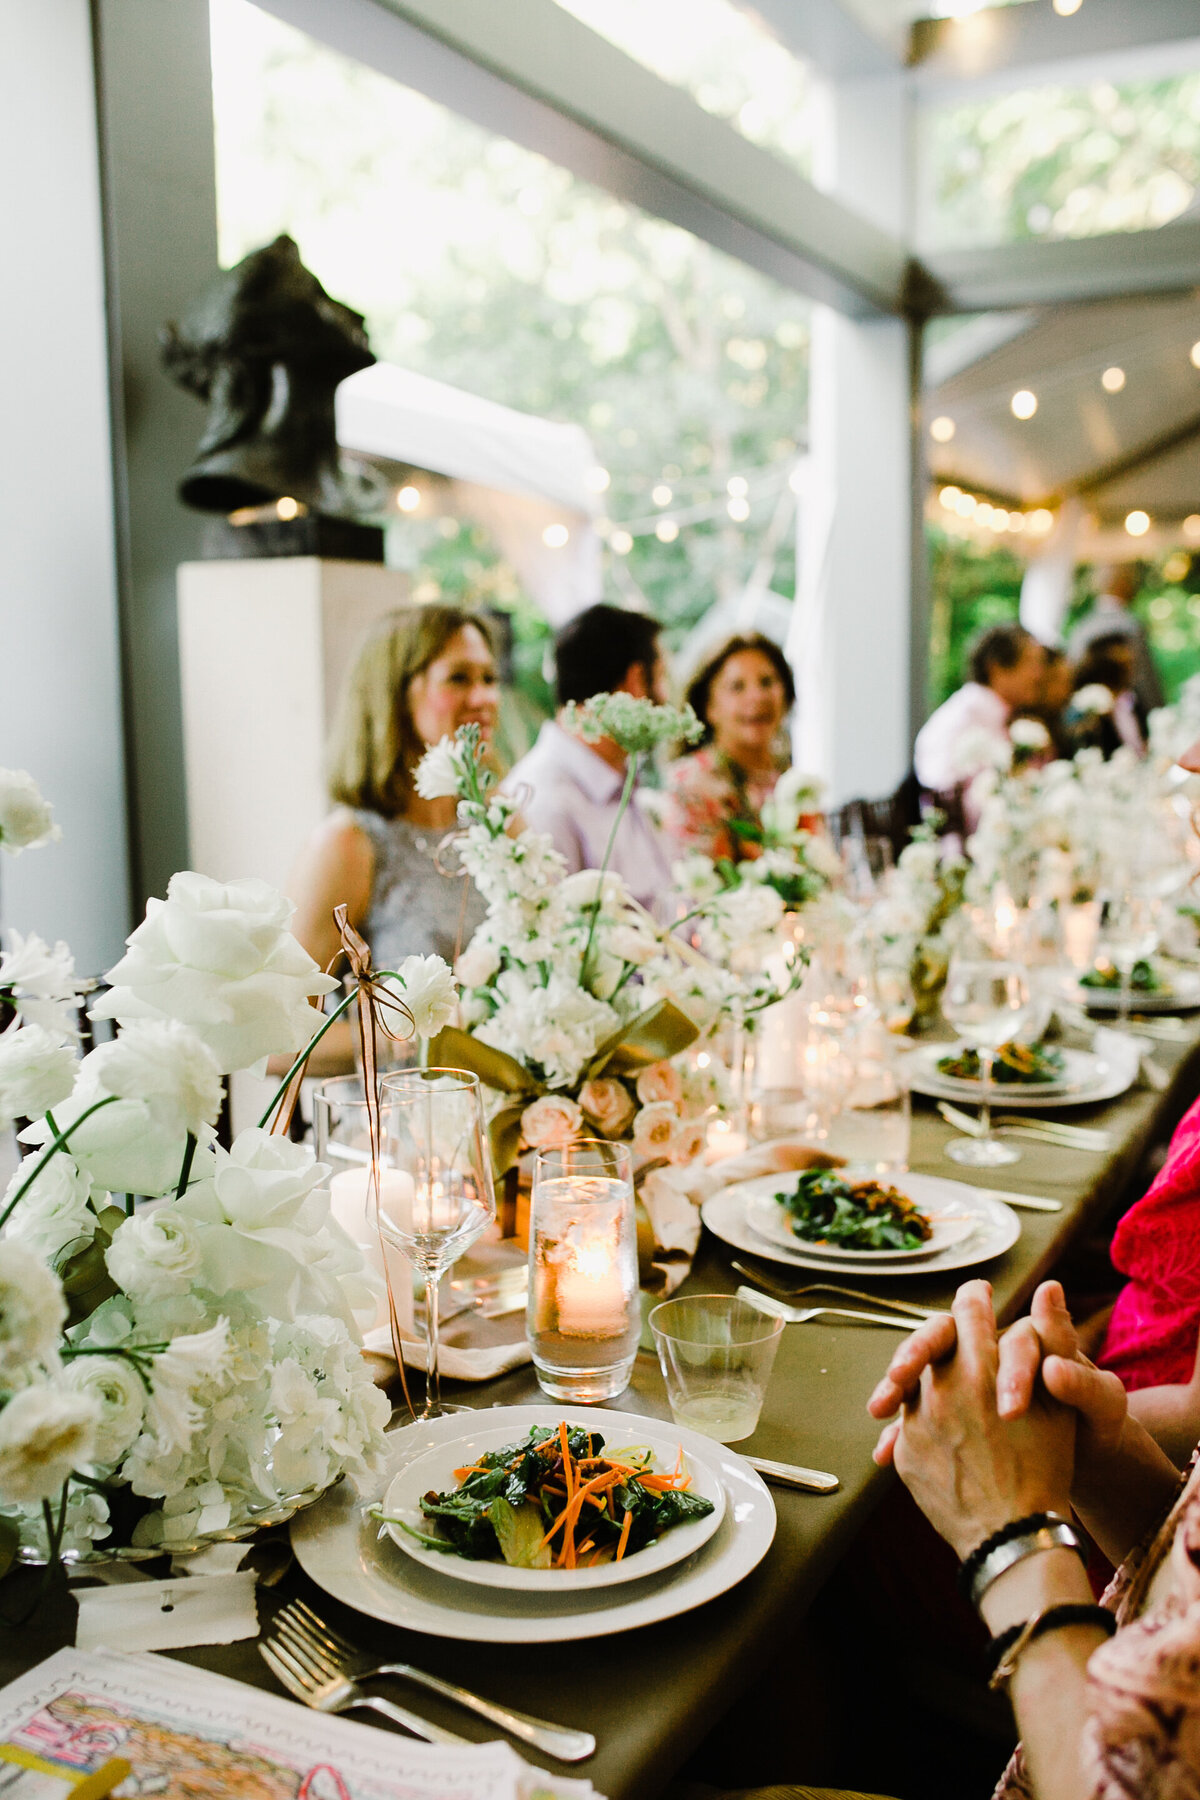 Guests at wedding reception table decorated with white florals and candles